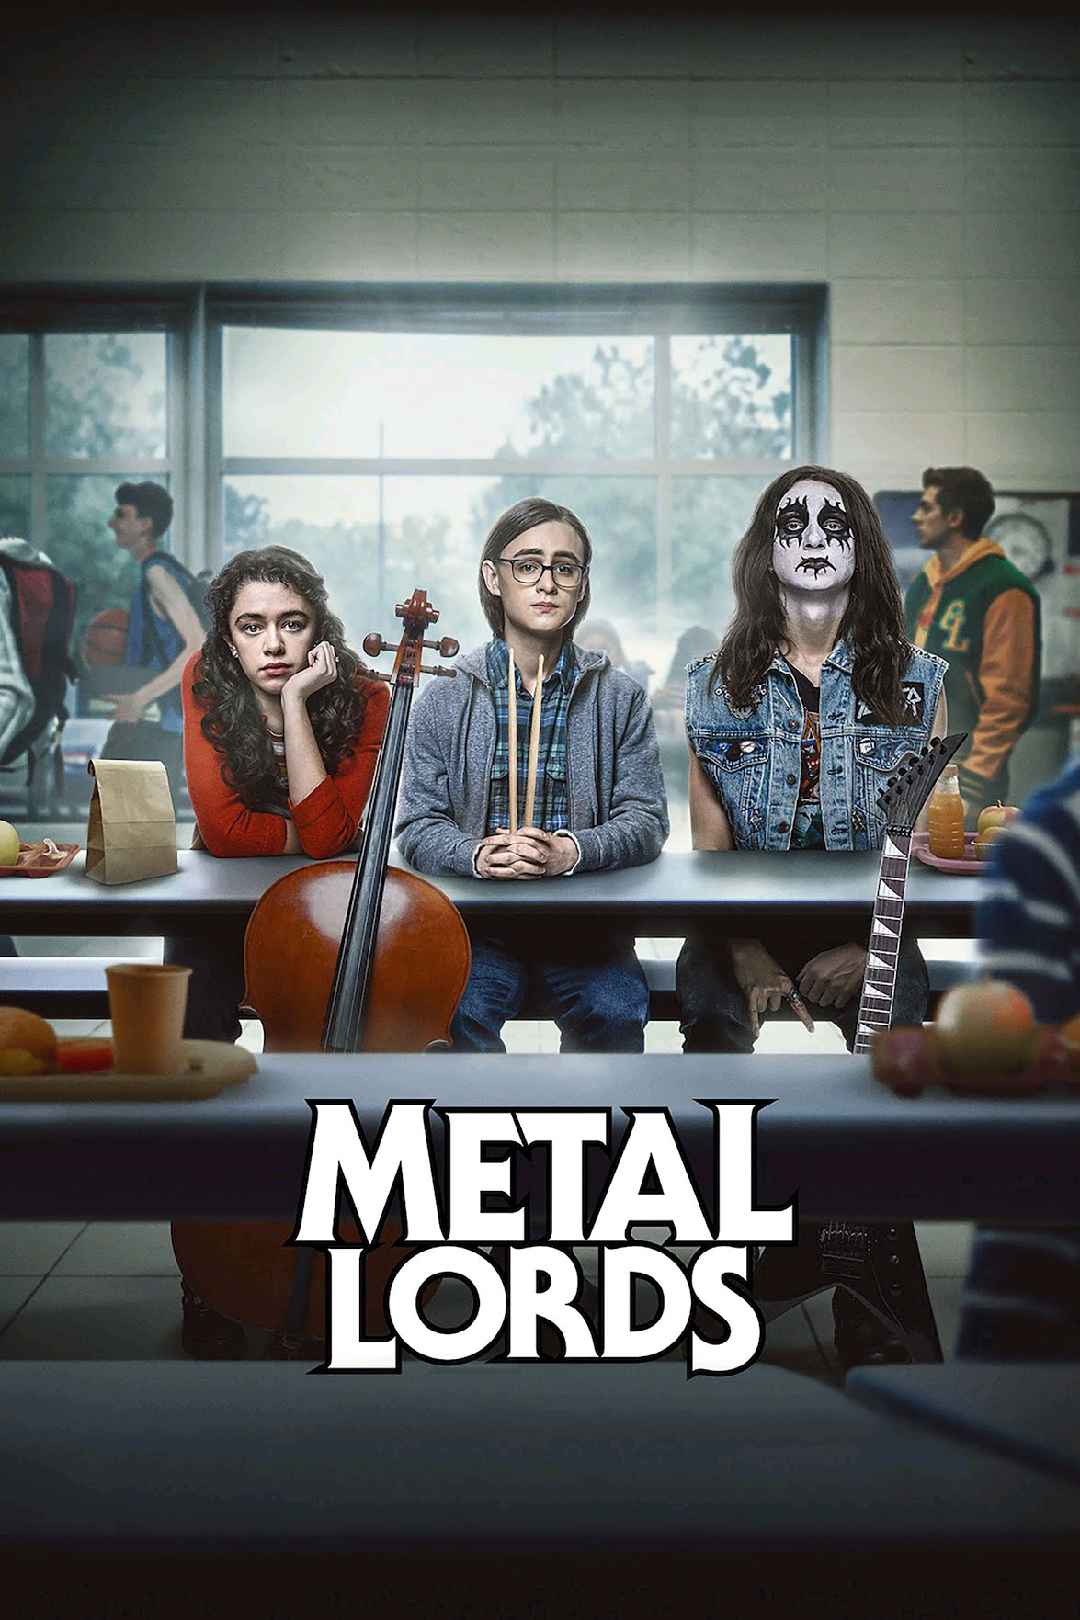 Metal Lord's (2022) Review And Movie Summary.